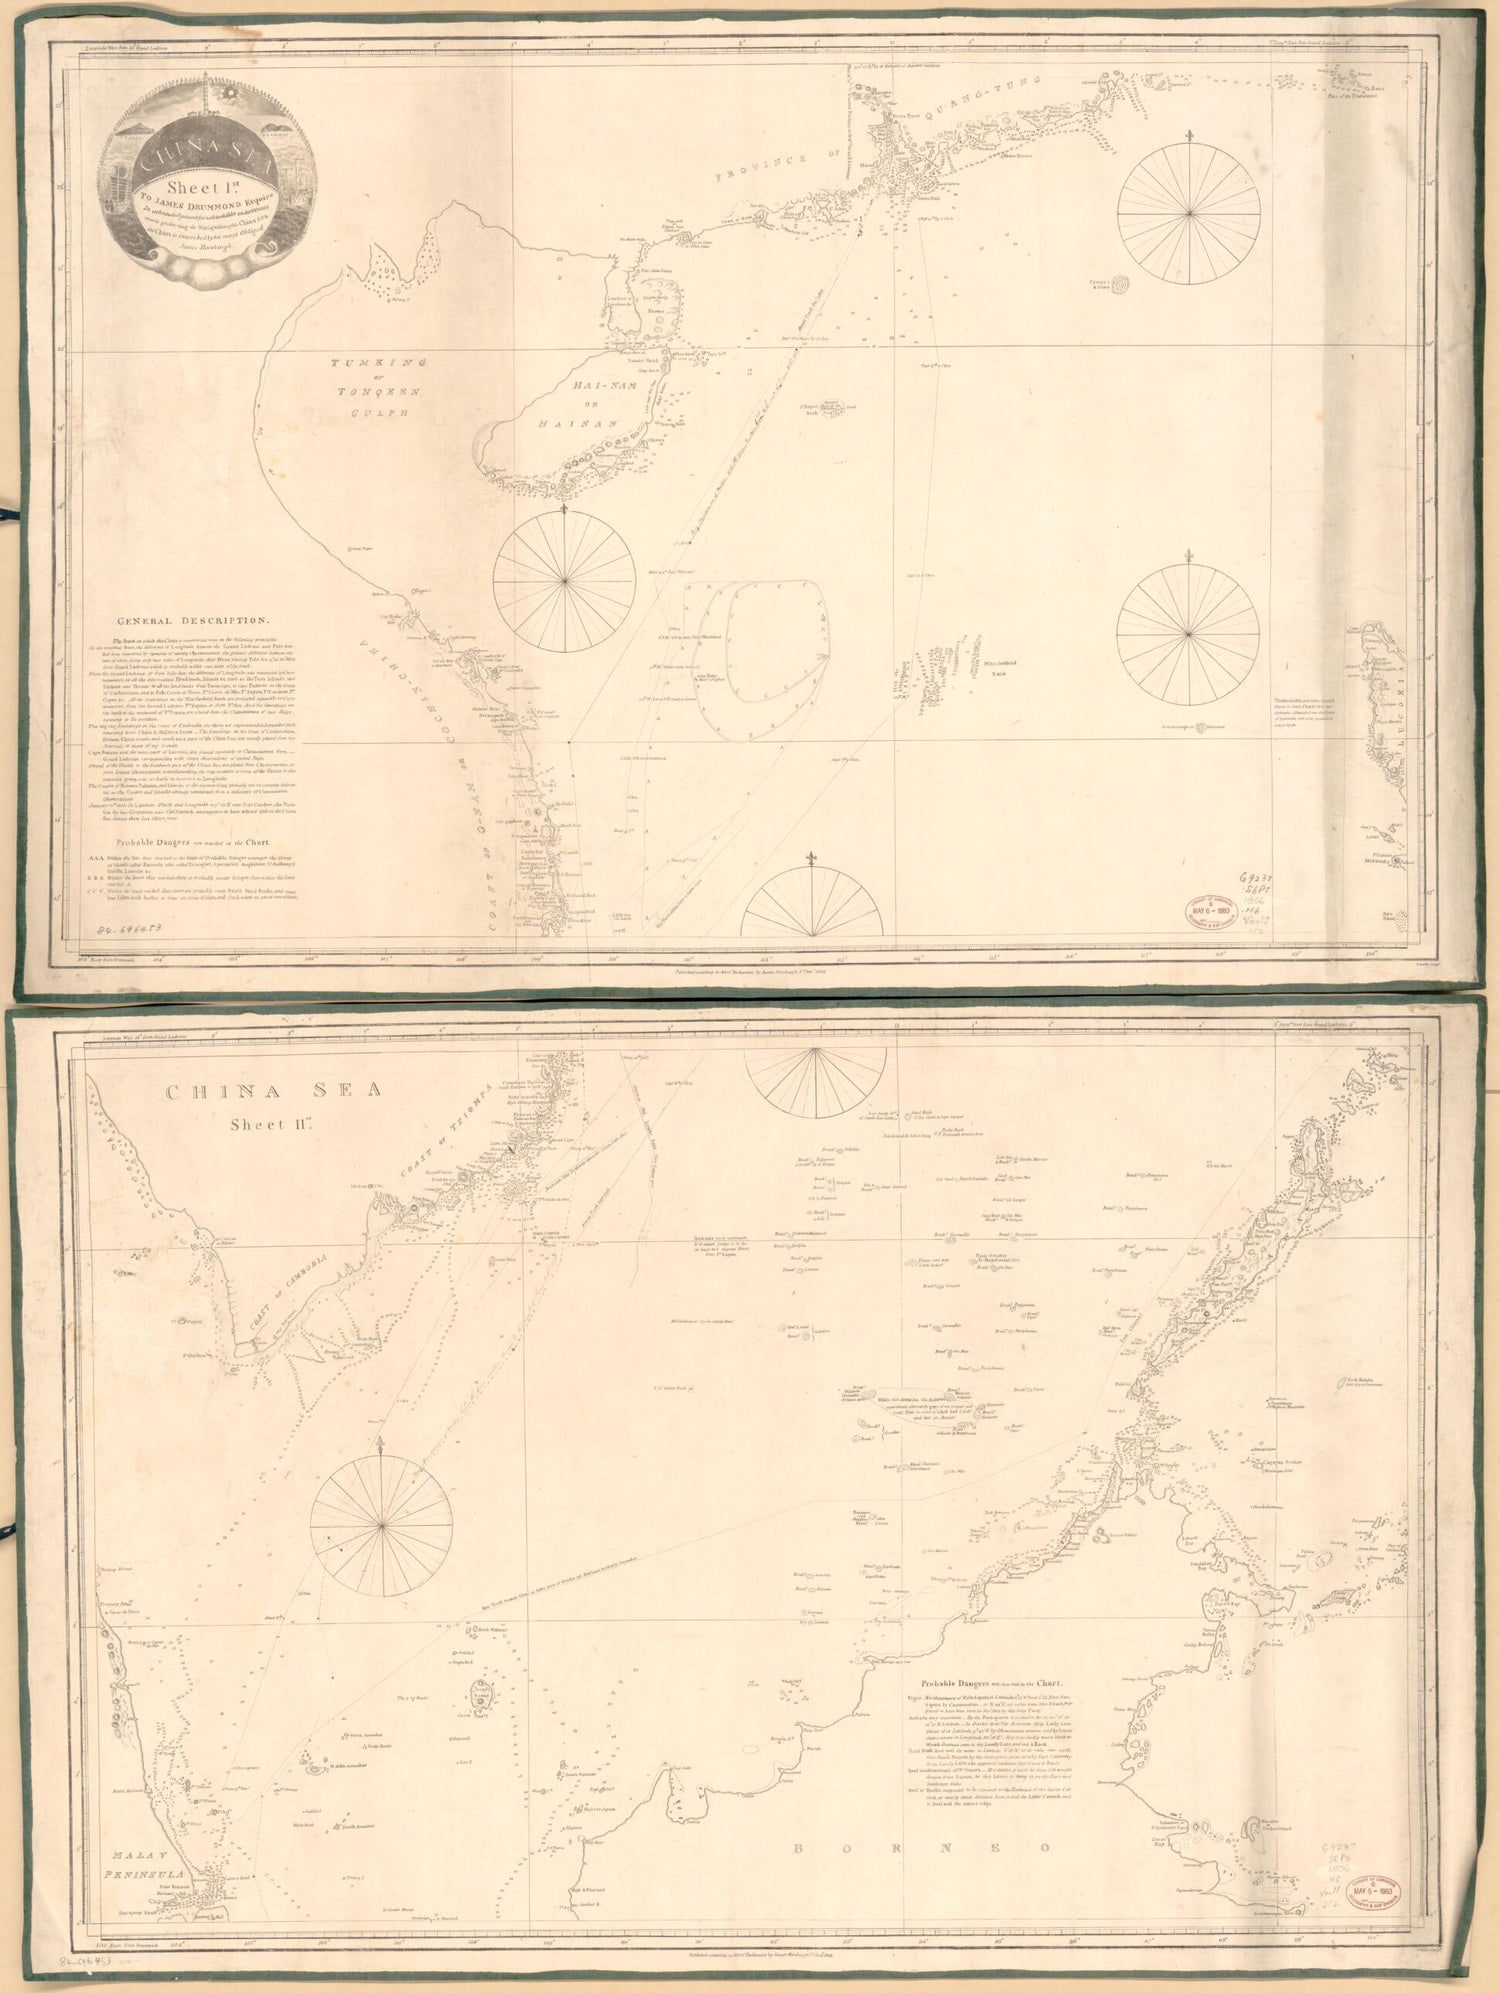 This old map of China Sea from 1820 was created by James Horsburgh, J. Walker in 1820